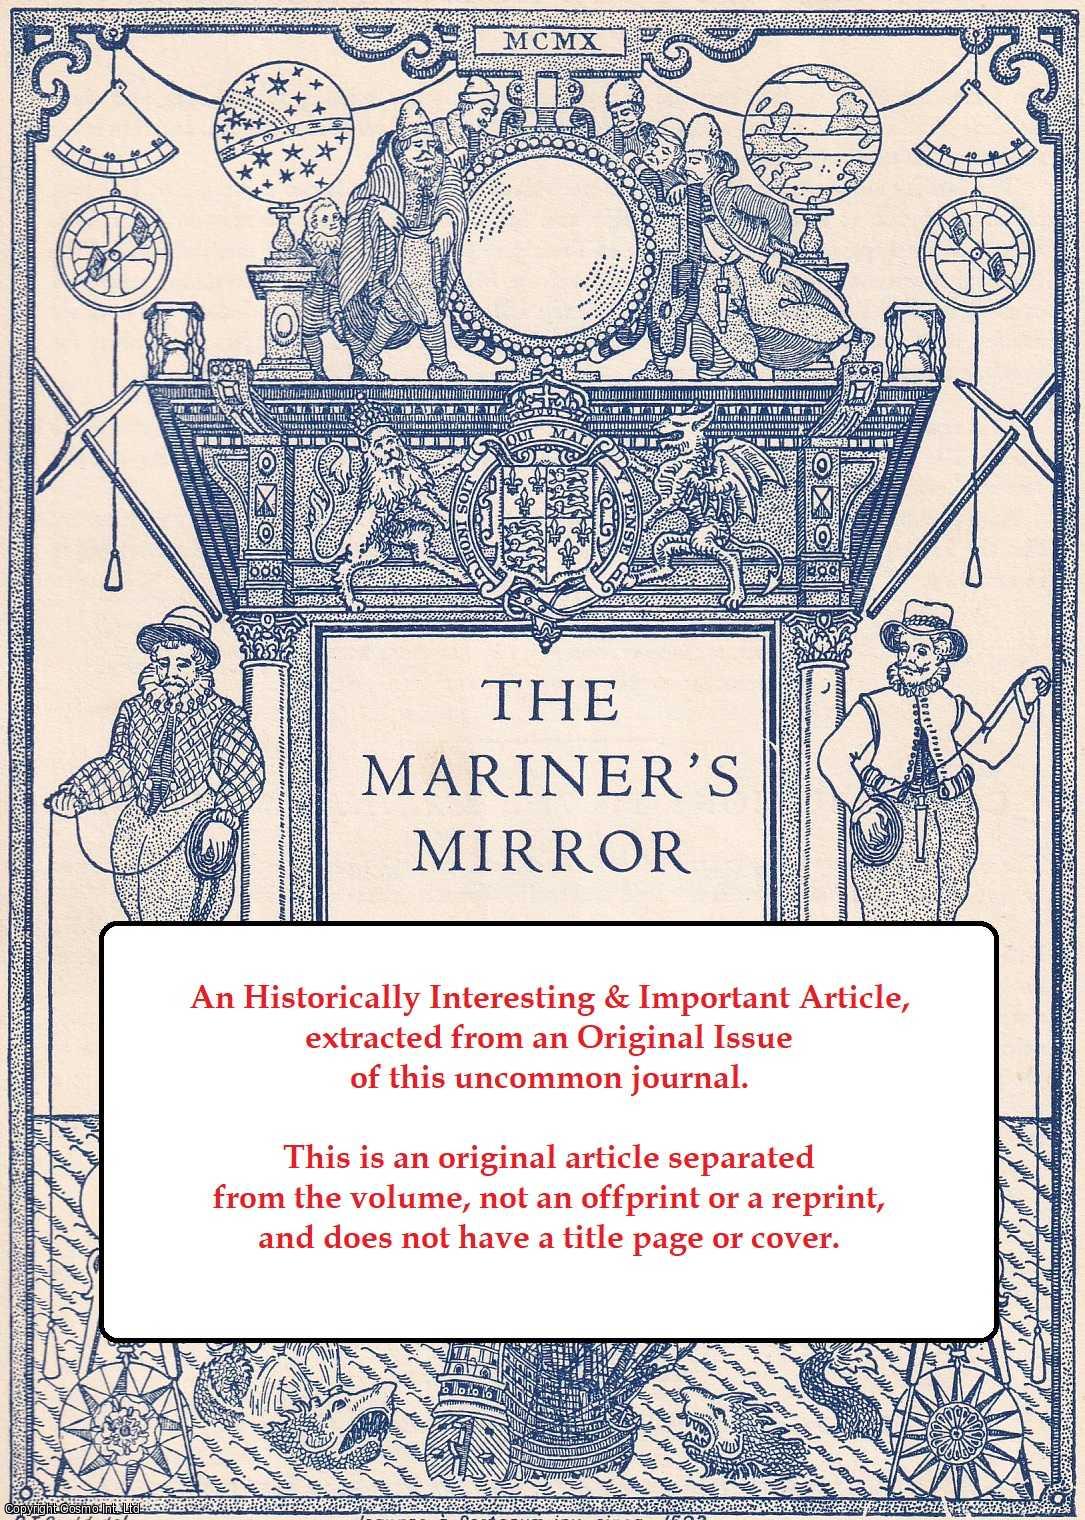 Alfred J. Marini - Parliament and The Marine Regiments, 1739. An original article from the Mariner's Mirror, 1976.